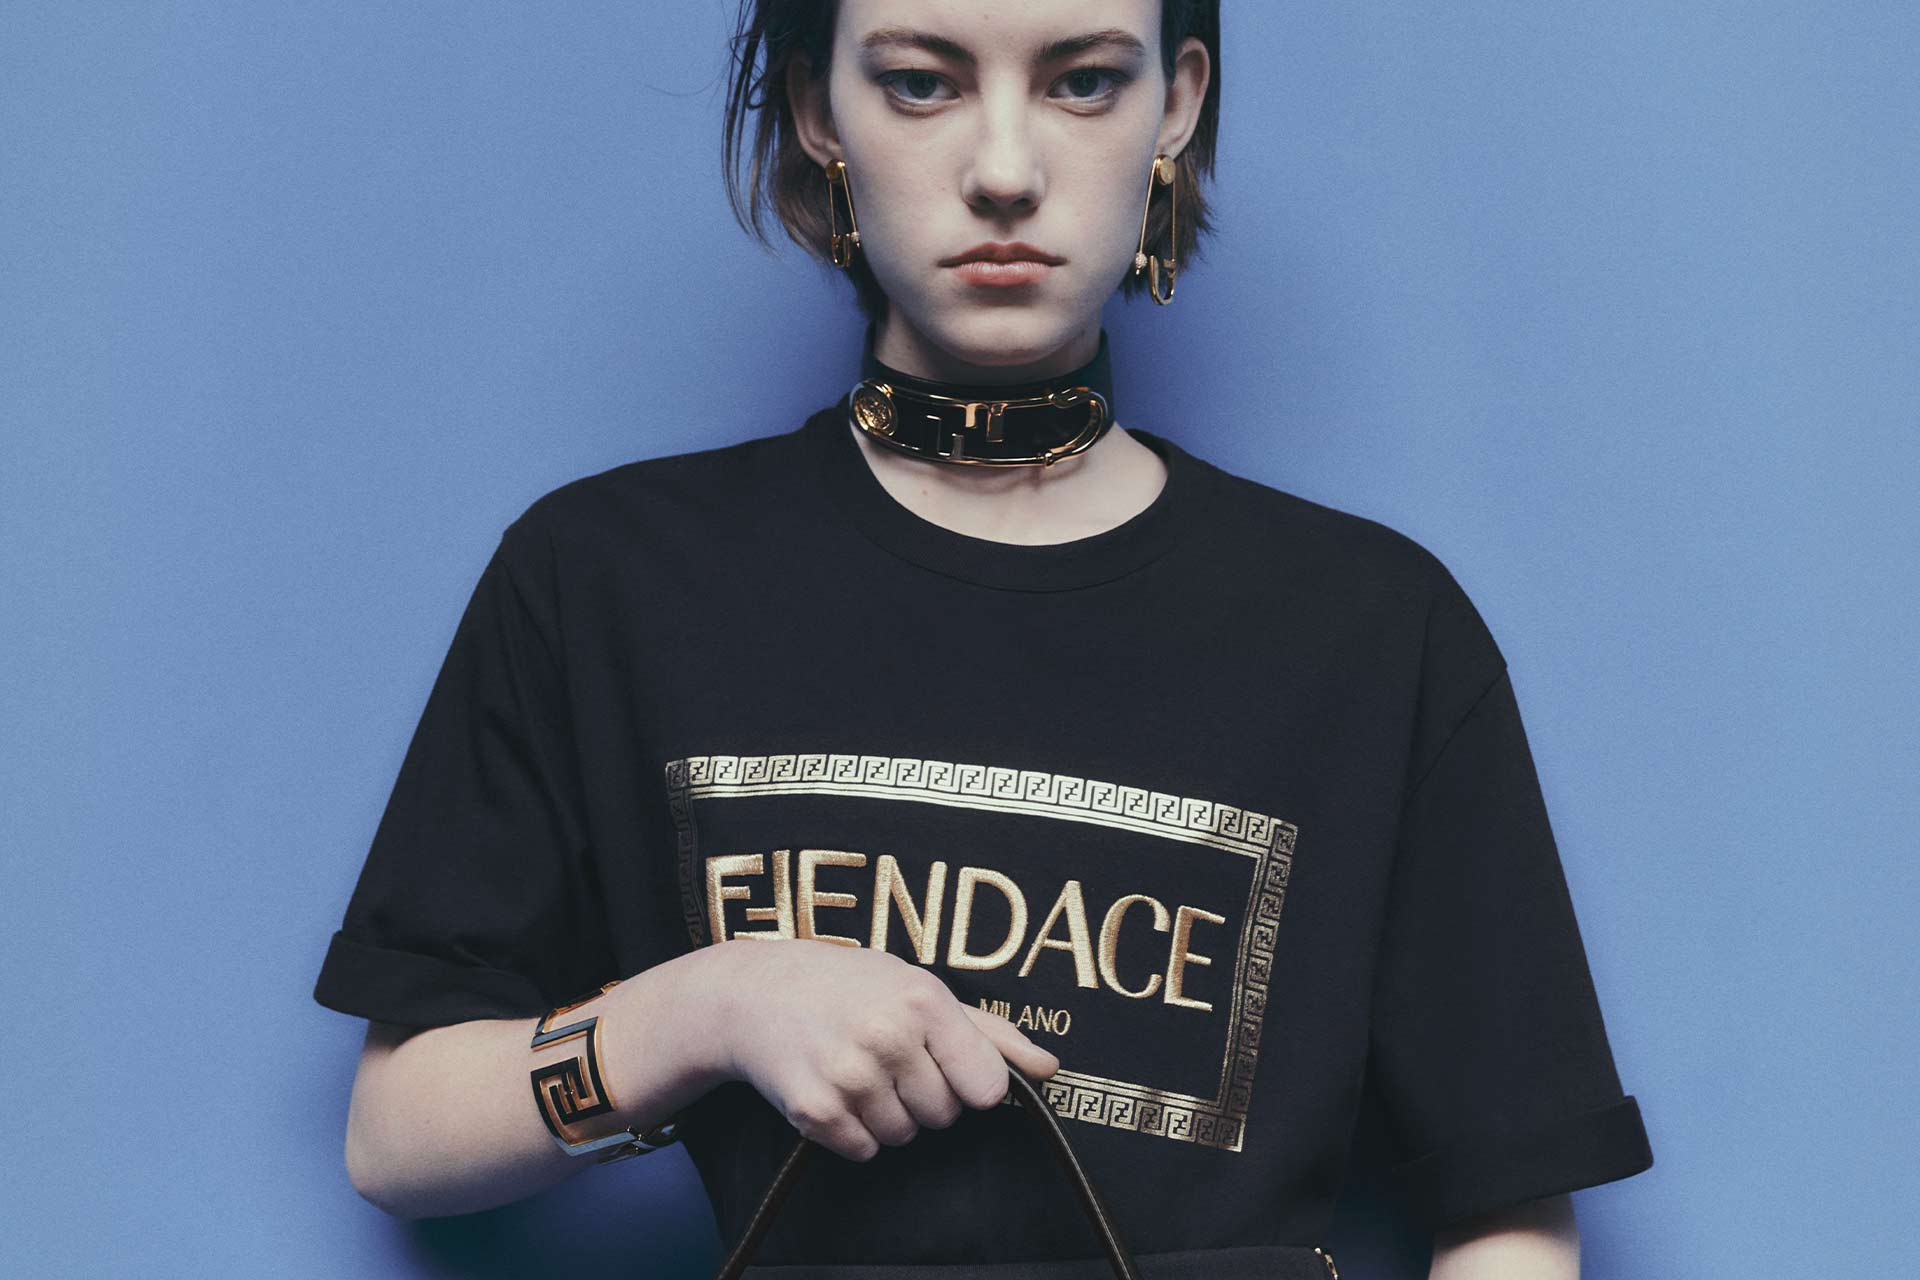 Fendace: the first swap in the fashion industry – Not a collaboration